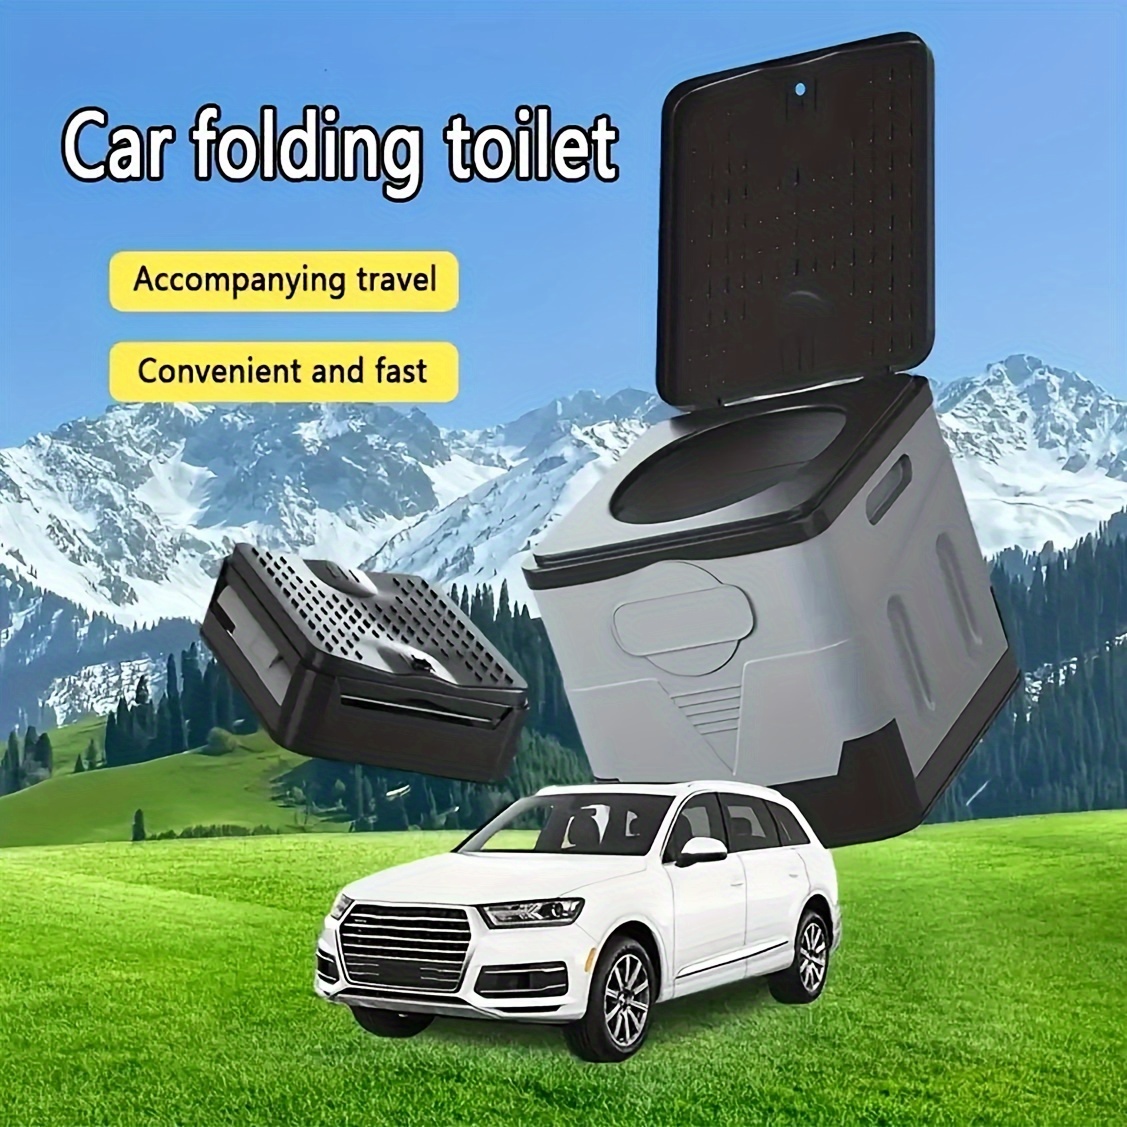 

1pc Portable Folding Toilet For Outdoor Use, Lightweight, Secure With Snap Lock, Versatile For Camping, Fishing, And Travel Easy-carry Design